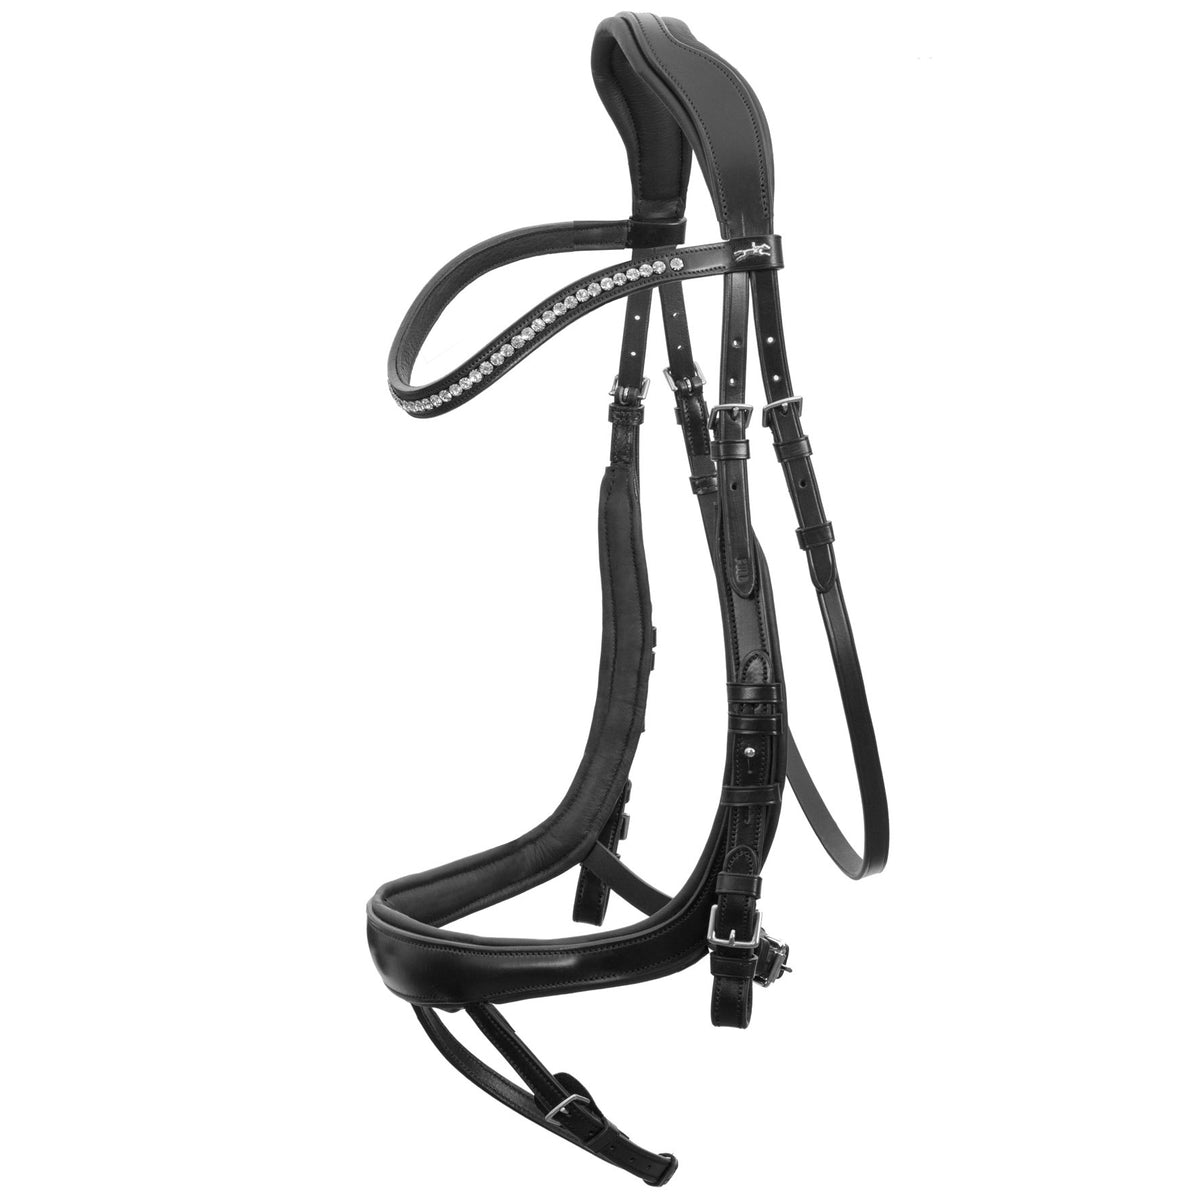 Schockemohle Equitus Beta Anatomical Special Bridle